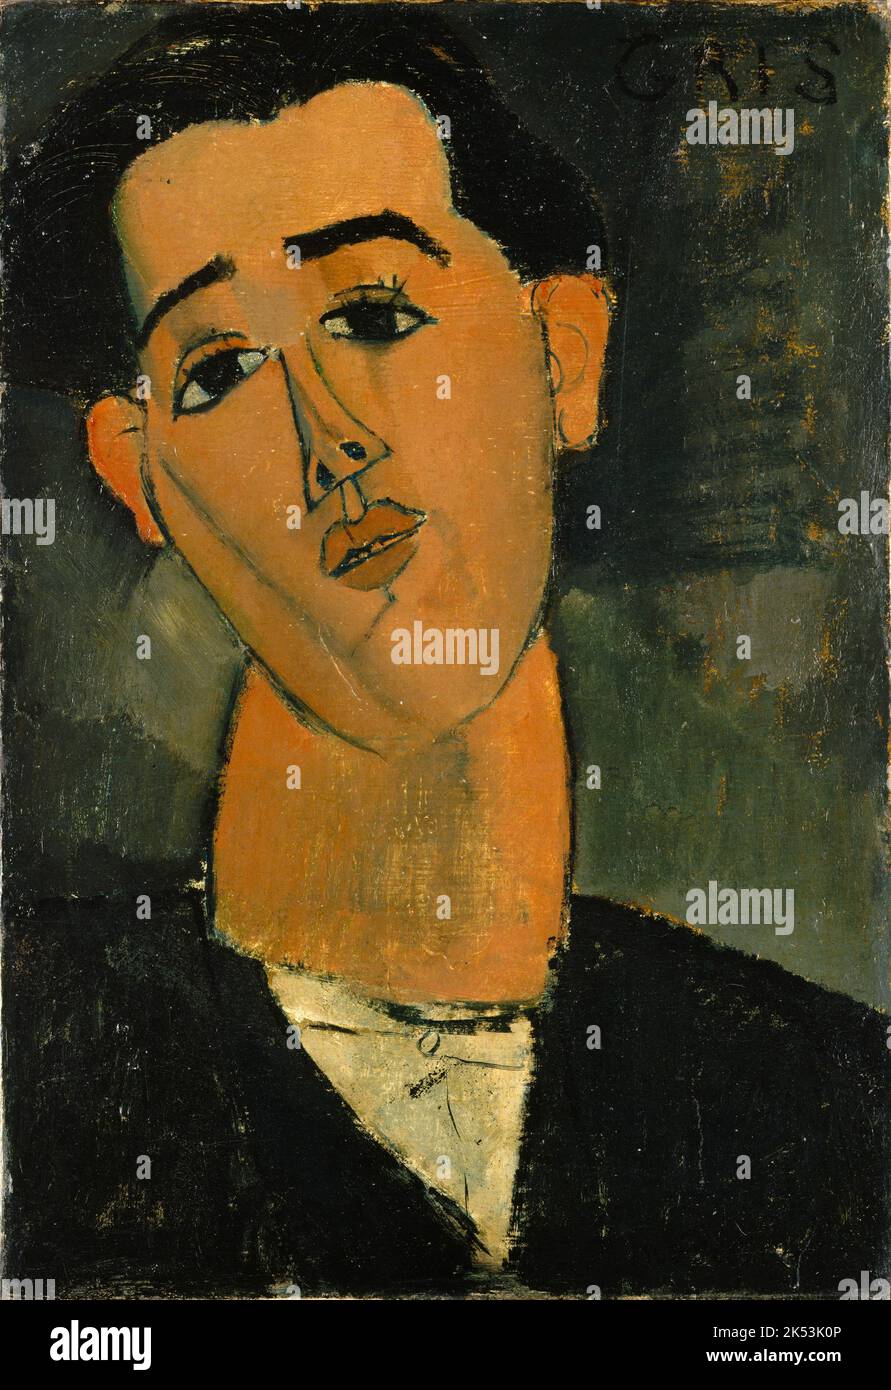 Portrait of Juan Gris, 1915, Painting by Amedeo Modigliani Stock Photo